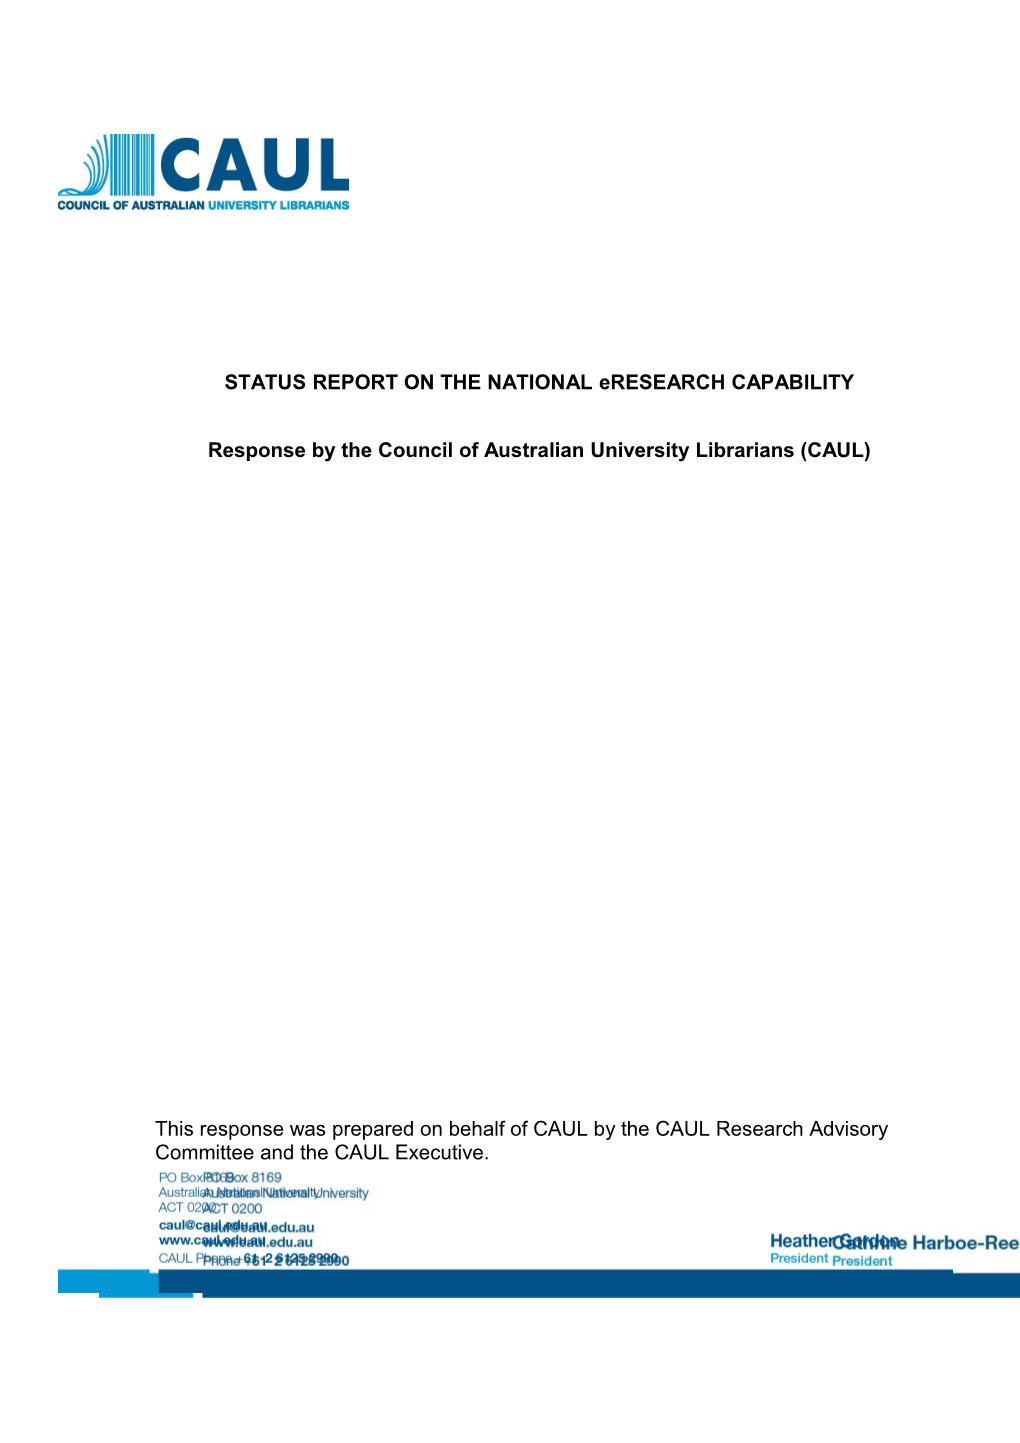 STATUS REPORT on the NATIONAL Eresearch CAPABILITY